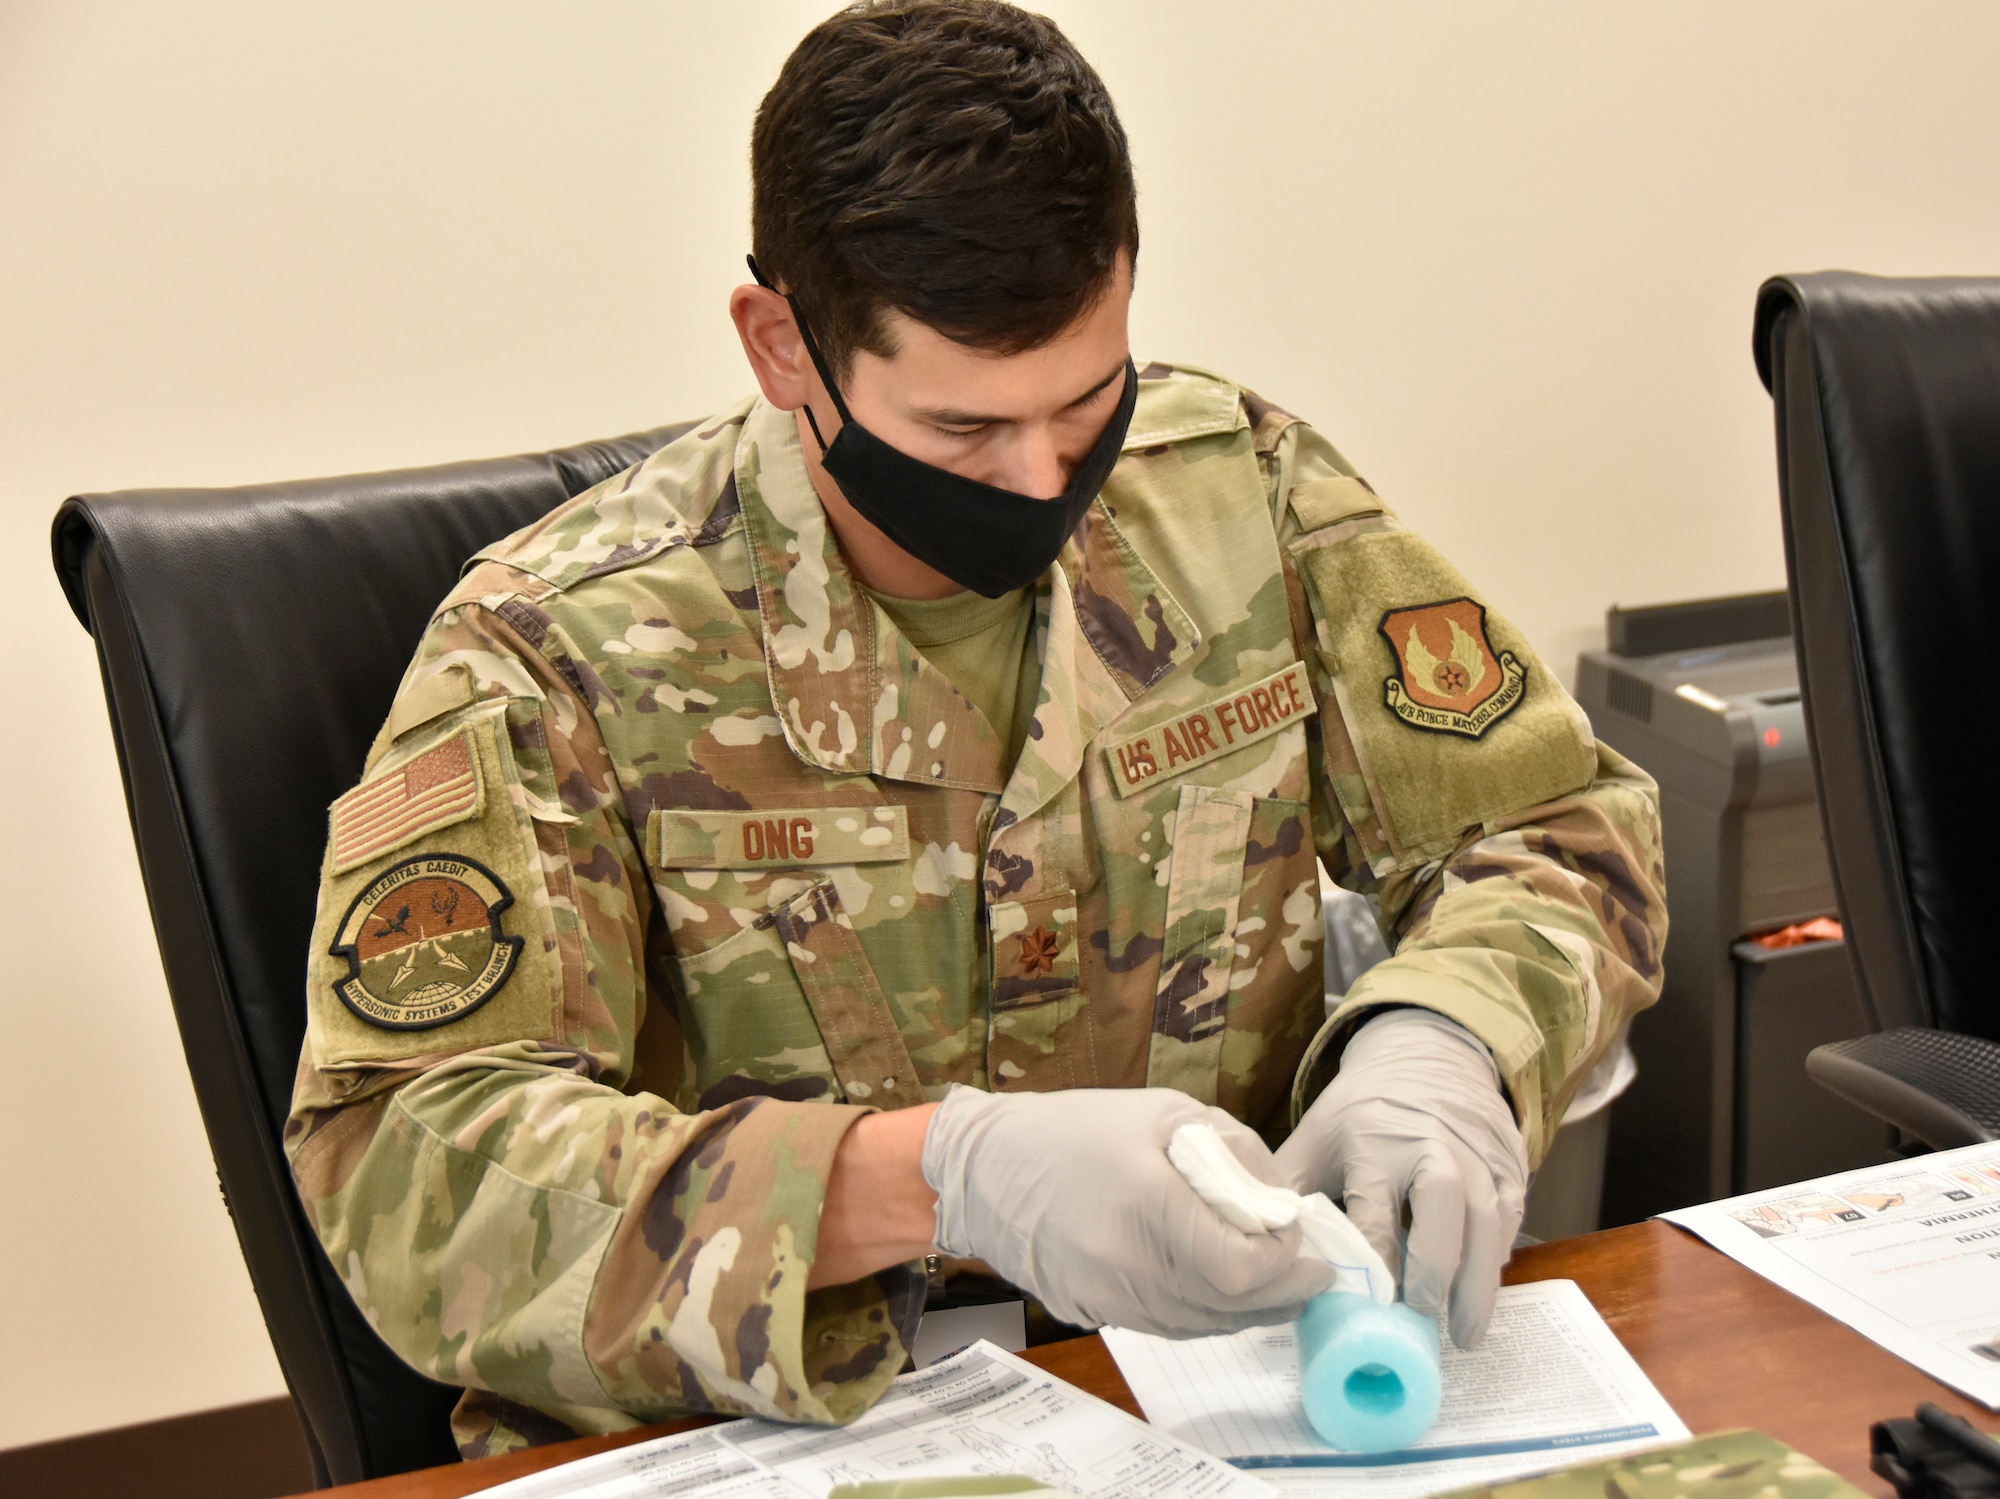 Maj. Justin Ong uses a pool noodle to practice wound packing during Tactical Combat Casualty Care training Aug. 15, 2022, at the Medical Aid Station at Arnold Air Force Base, Tennessee. The pool noodle represents a massive bleeding injury requiring immediate care. TCCC trainees are taught lifesaving techniques, strategies and procedures, allowing those who have been trained to provide best practice trauma care both on and off the battlefield. Ong was part of the first TCCC class at Arnold. The first level of TCCC training is required by all Department of Defense service members by April 2023. (U.S. Air Force photo by Bradley Hicks) (This image was altered by obscuring a badge for security purposes)